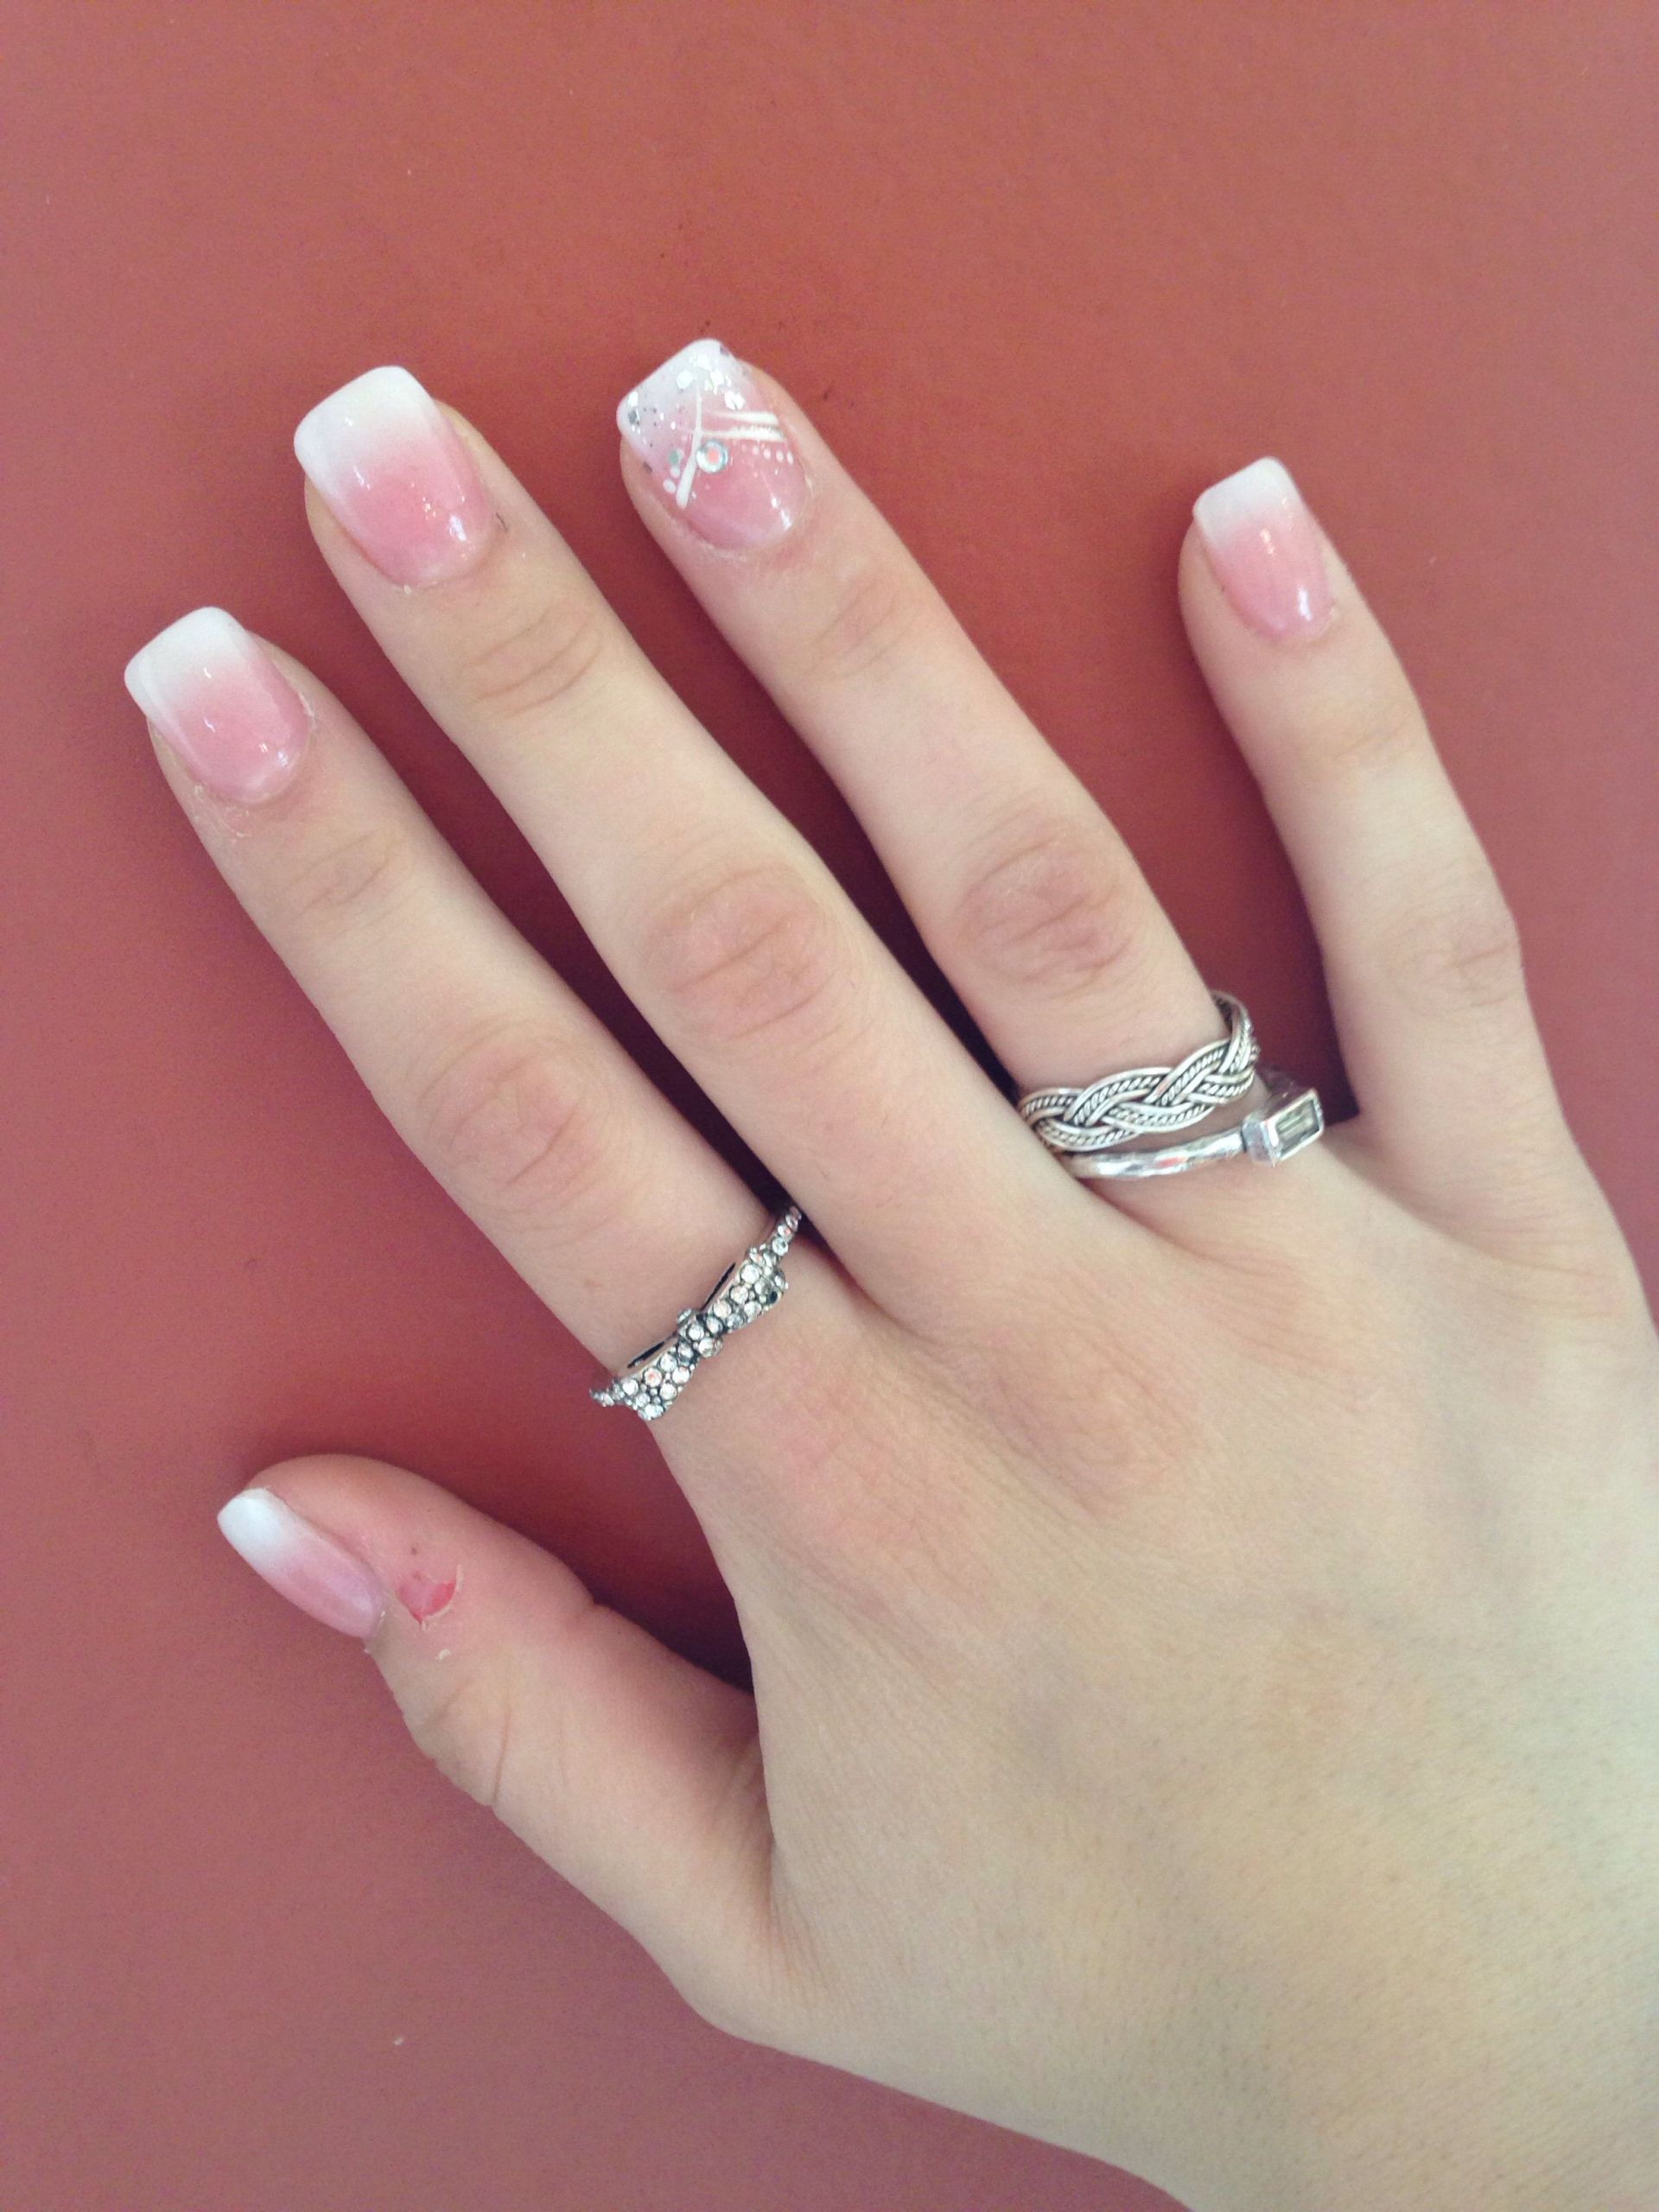 French Manicure Acrylic Nail Designs
 Full set acrylics Ombre faded French manicure with